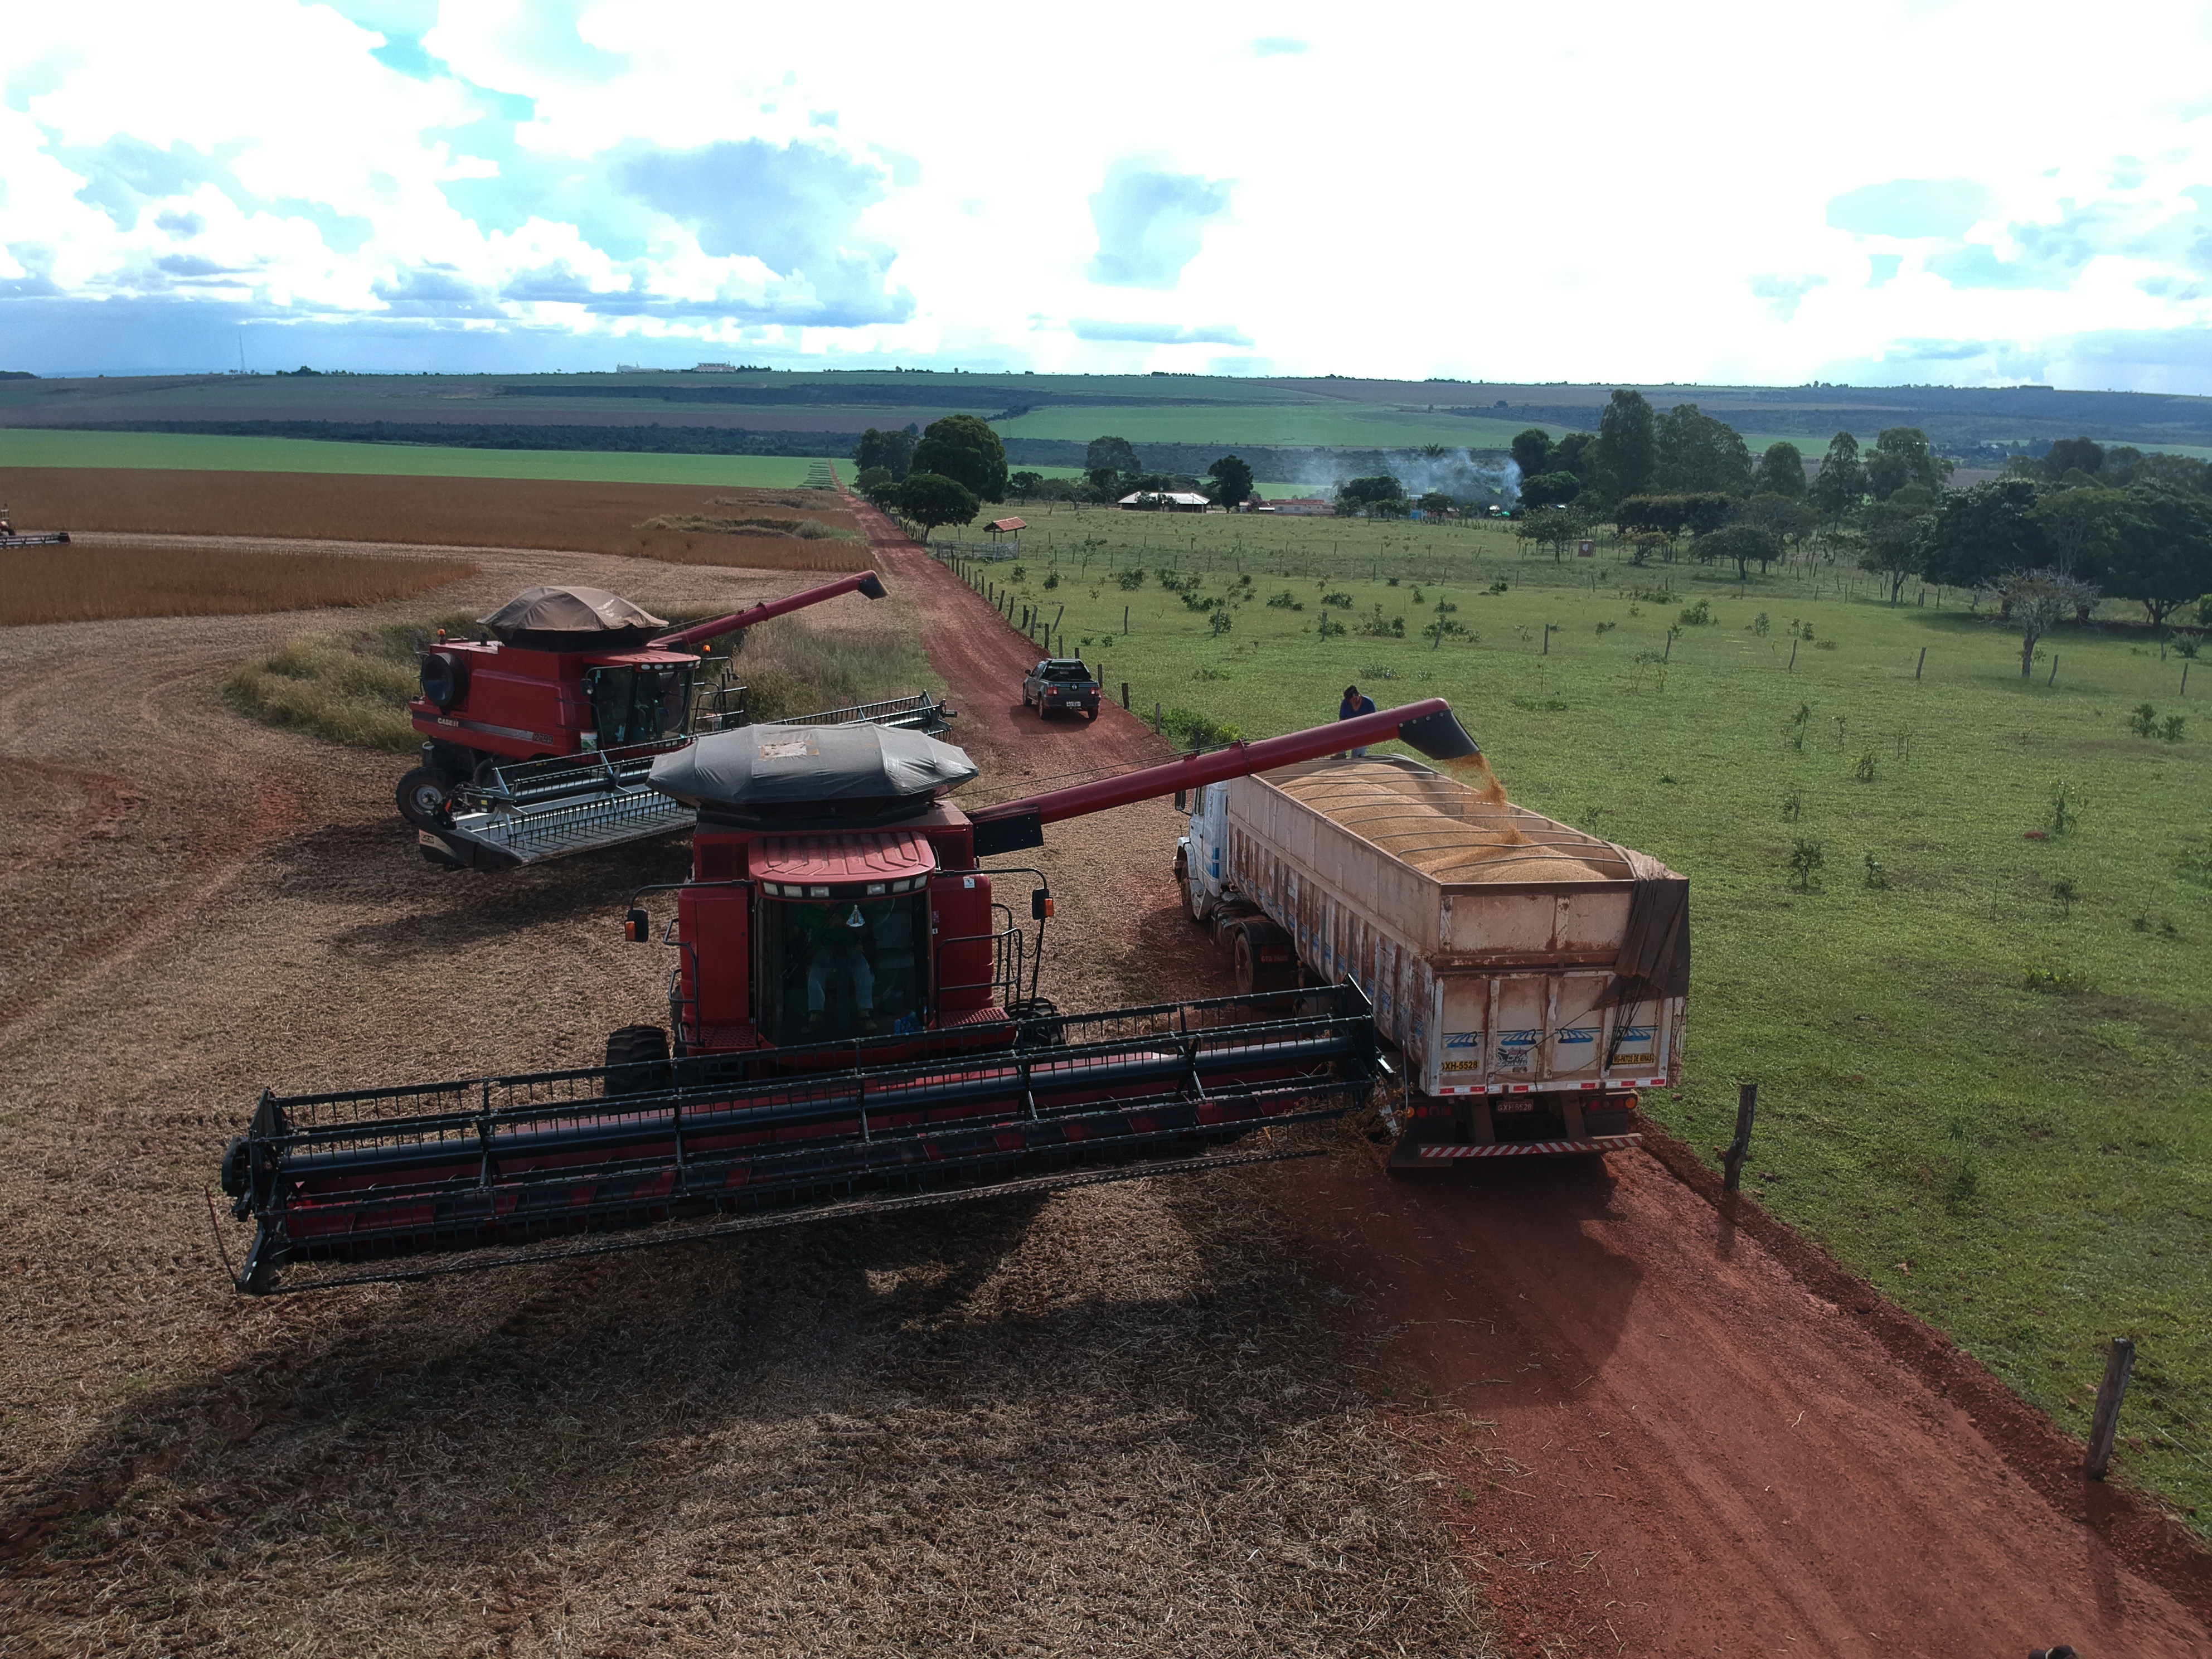 Brazil (pictured) provides China with nearly 60 per cent of its soybean imports, compared with just under 33 per cent from the United States. Photo: Xinhua